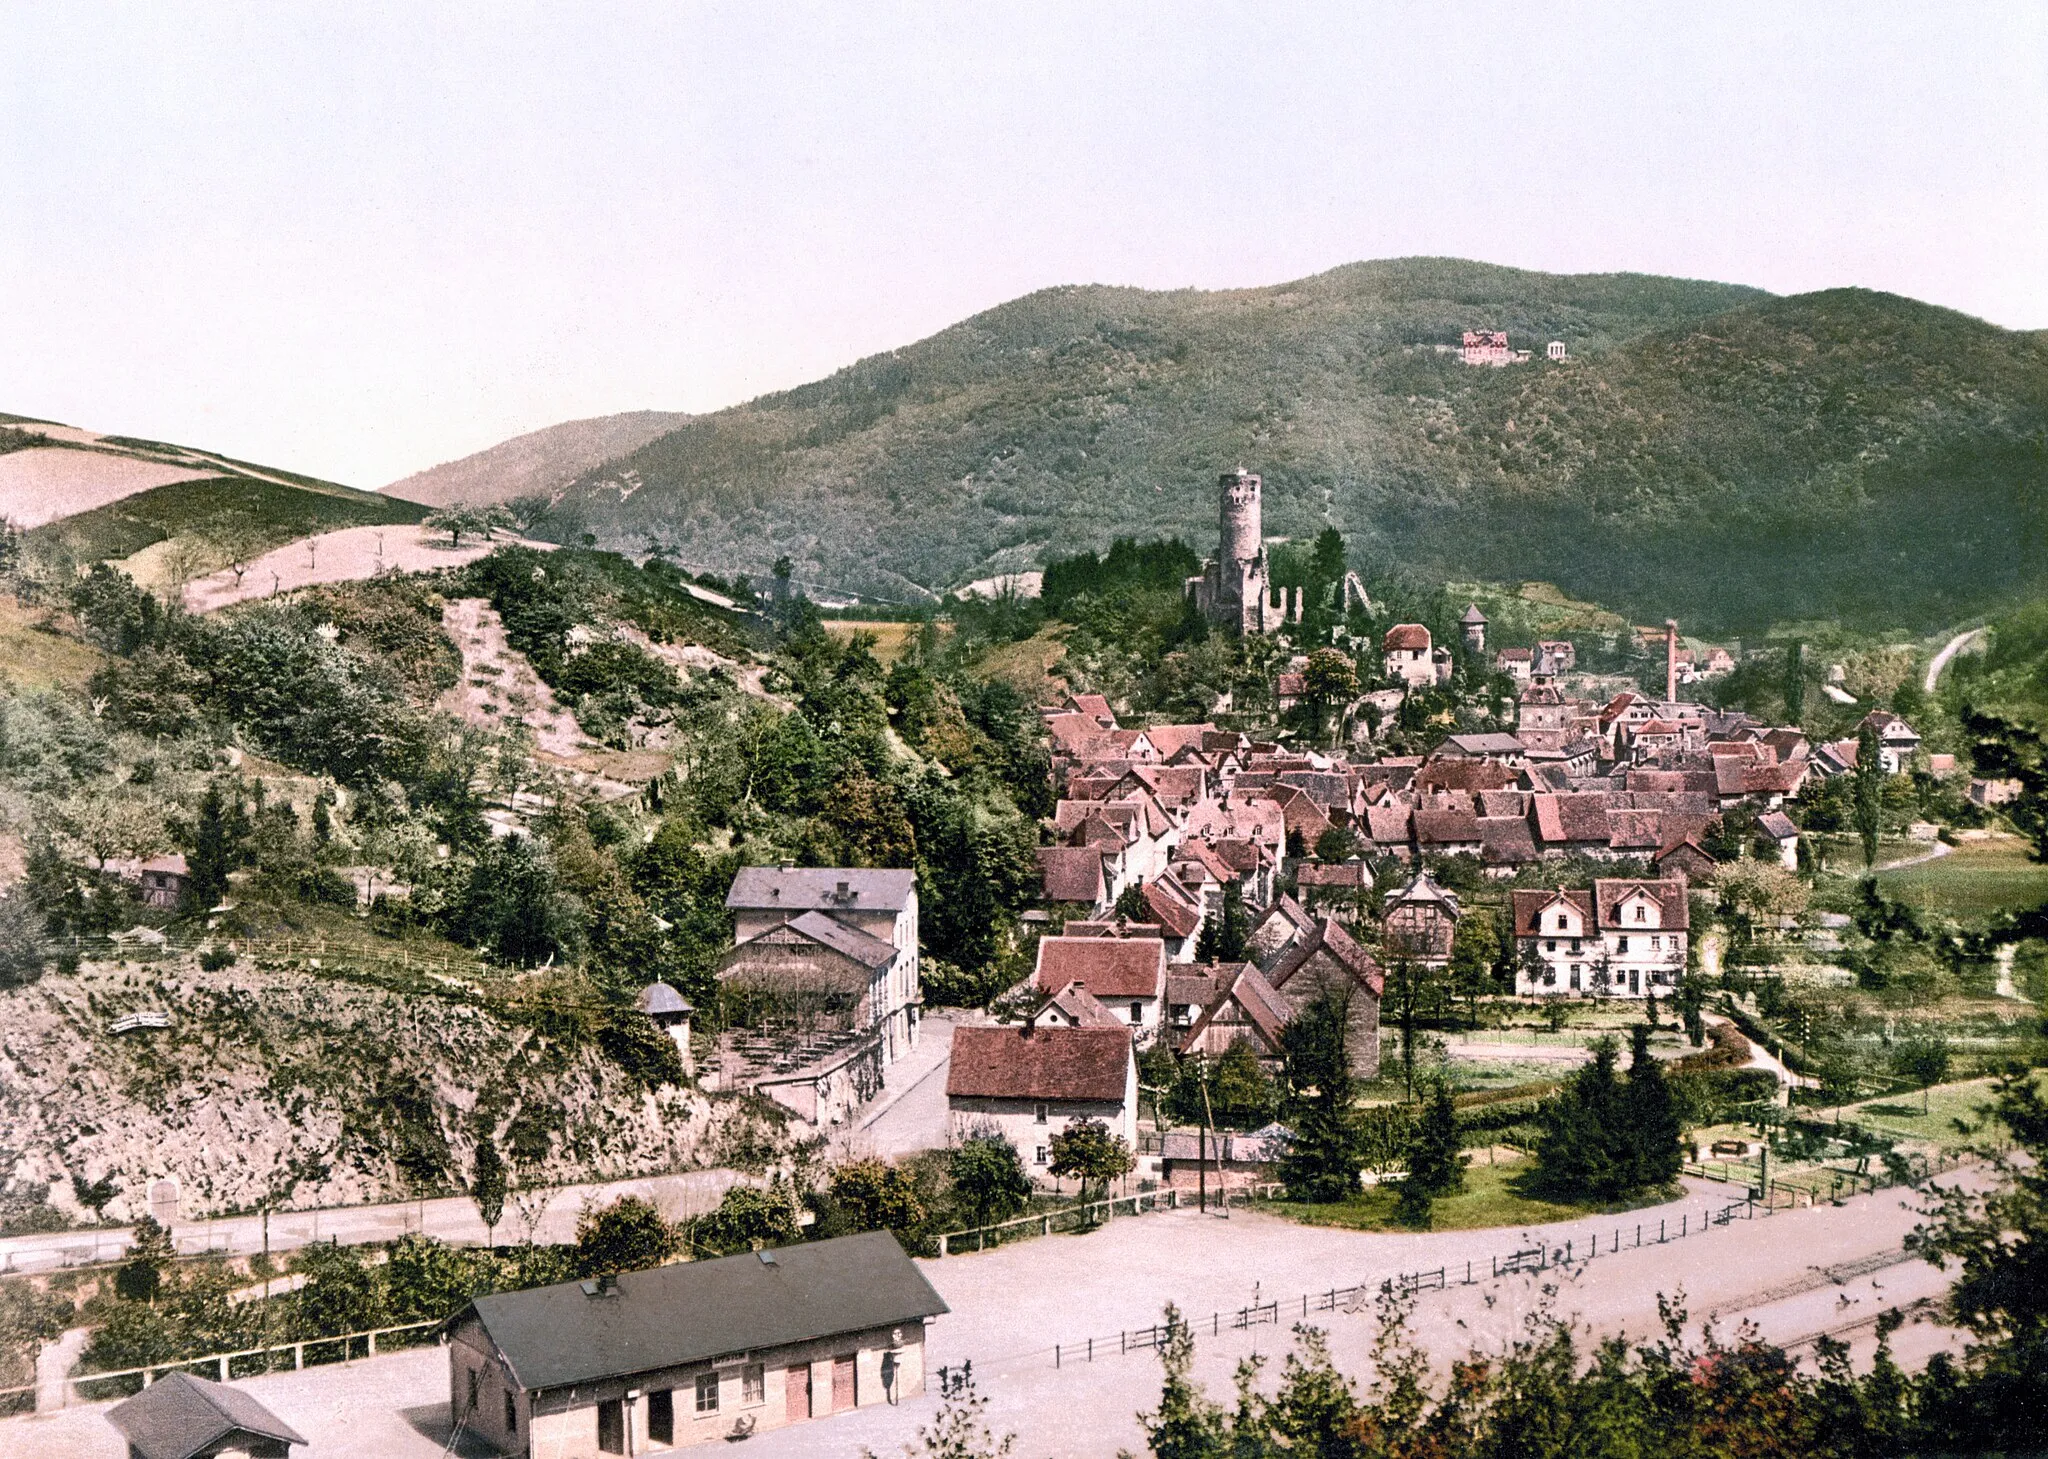 Photo showing: Eppstein and the ruin of Castle Eppstein